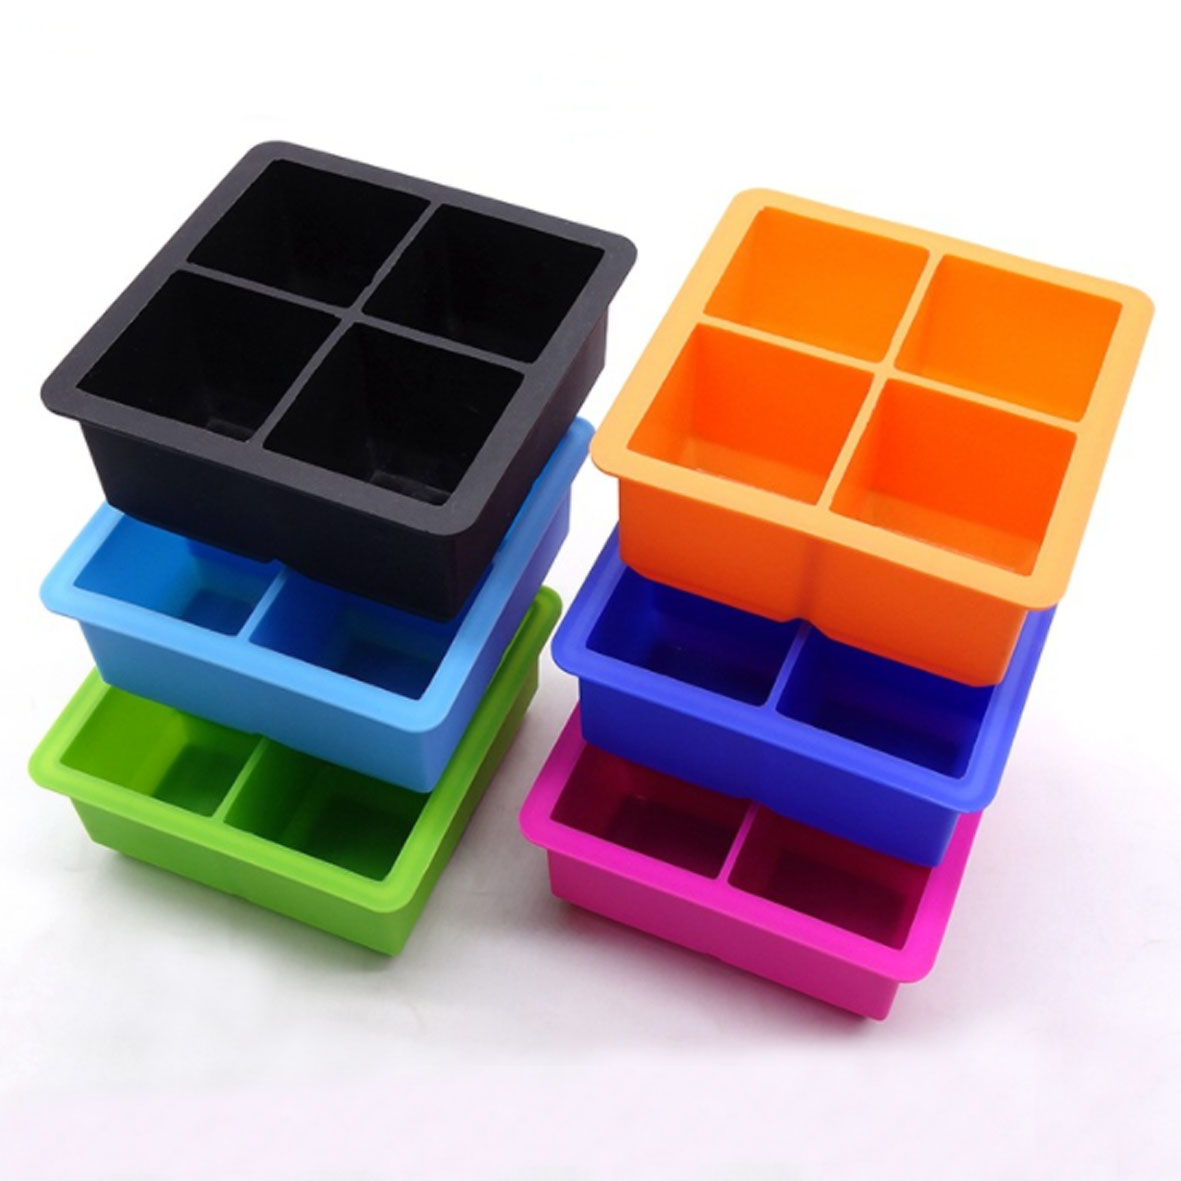 GL-AAA1454 4.5inch Silicone Ice Cube Tray